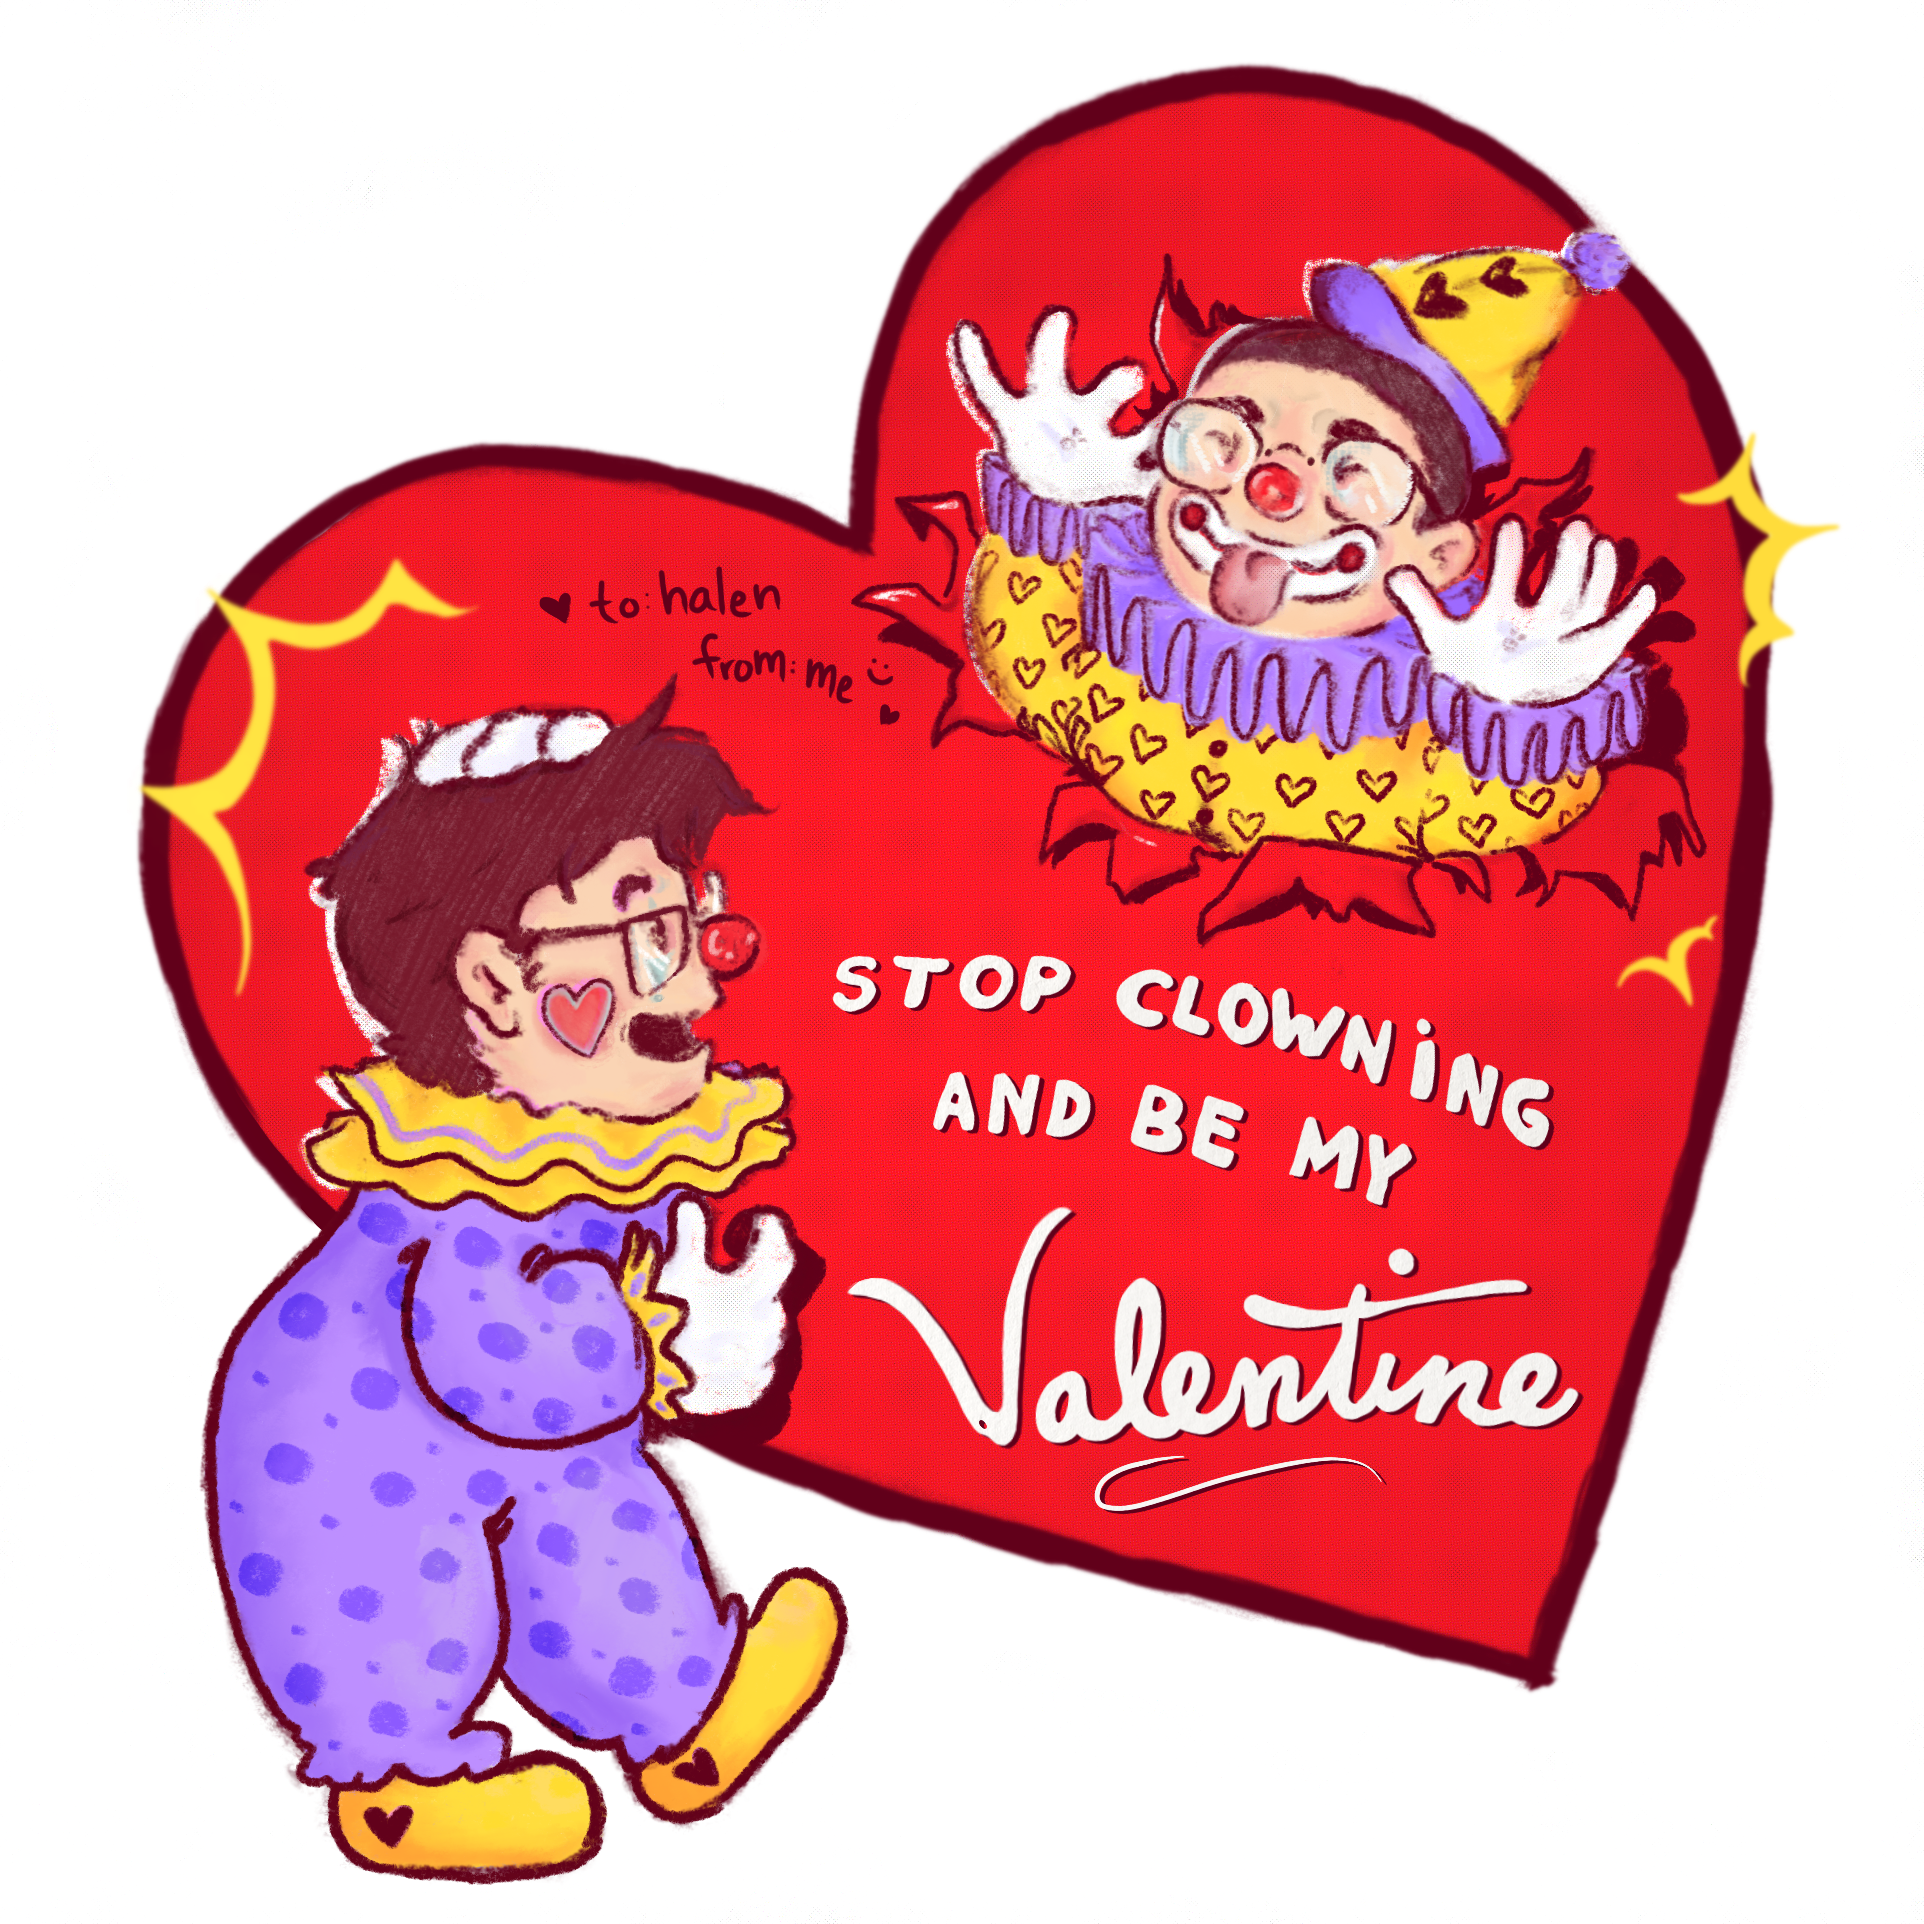 clown themed valentine card of me and my partner styled to be like a vintage crd, reads, ‘stop clowning and be my valentine.’ I am on your right wearing a yellow suit/ hat with red hearts, purple collar/ details, and my tongue is sticking out. I am also busting through the card, torn edges are around my body. My partner is on your left wearing a purple suit with circles, yellow collar/ details, and is looking at me shocked with their hand on their head.